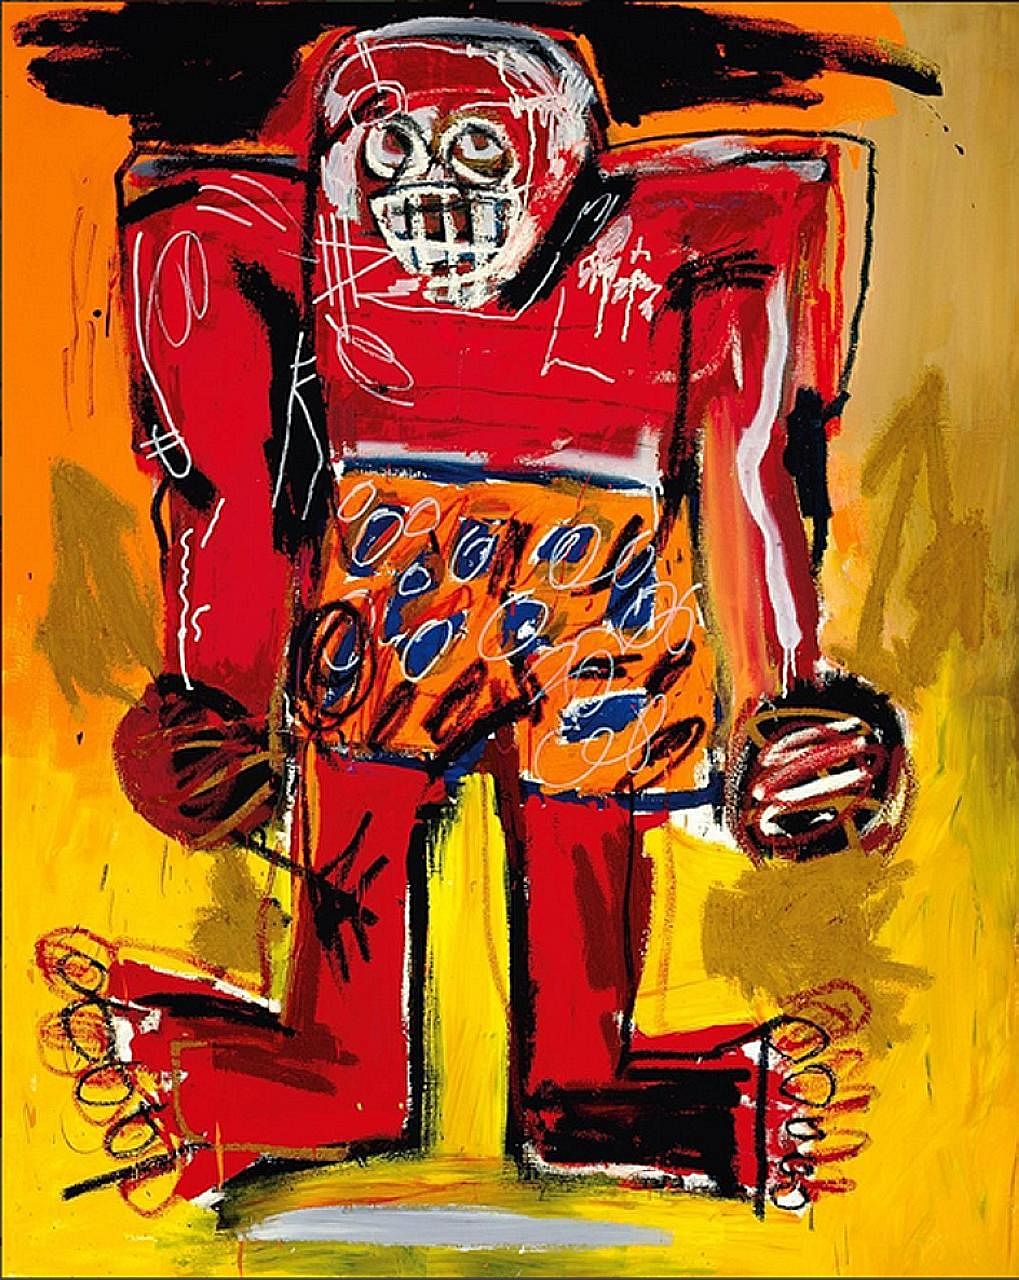 The posting of Jean-Michel Basquiat's painting of boxing champion Sugar Ray Robinson on Instagram led to its quick sale.